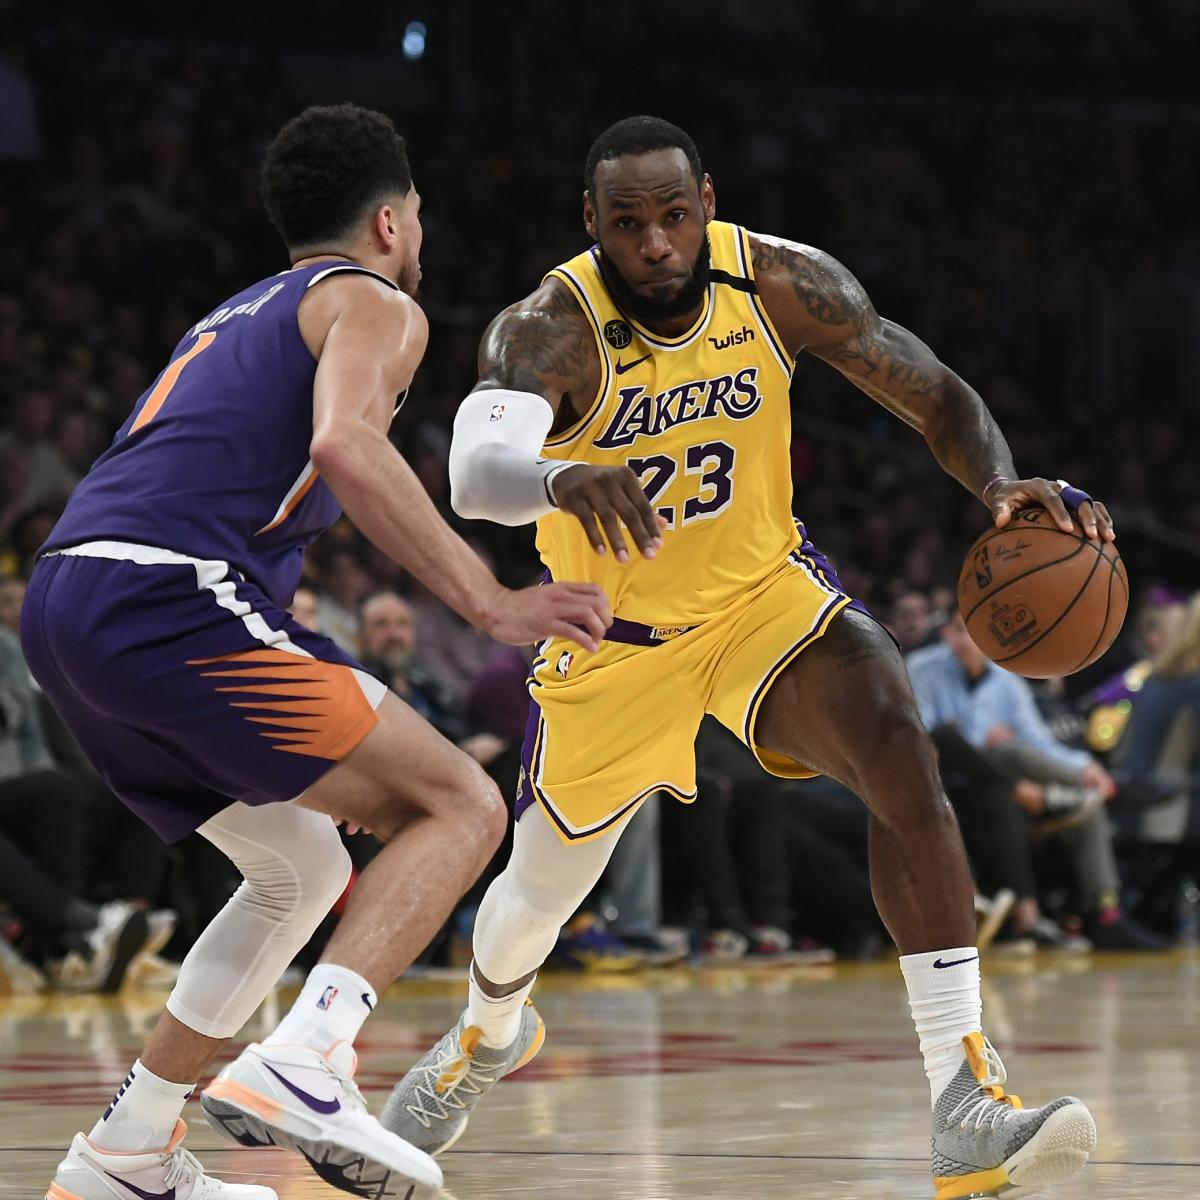 Anthony Davis, LeBron James Lead Lakers to Easy Win vs. Devin Booker, Suns. Bleacher Report. Latest News, Videos and Highlights